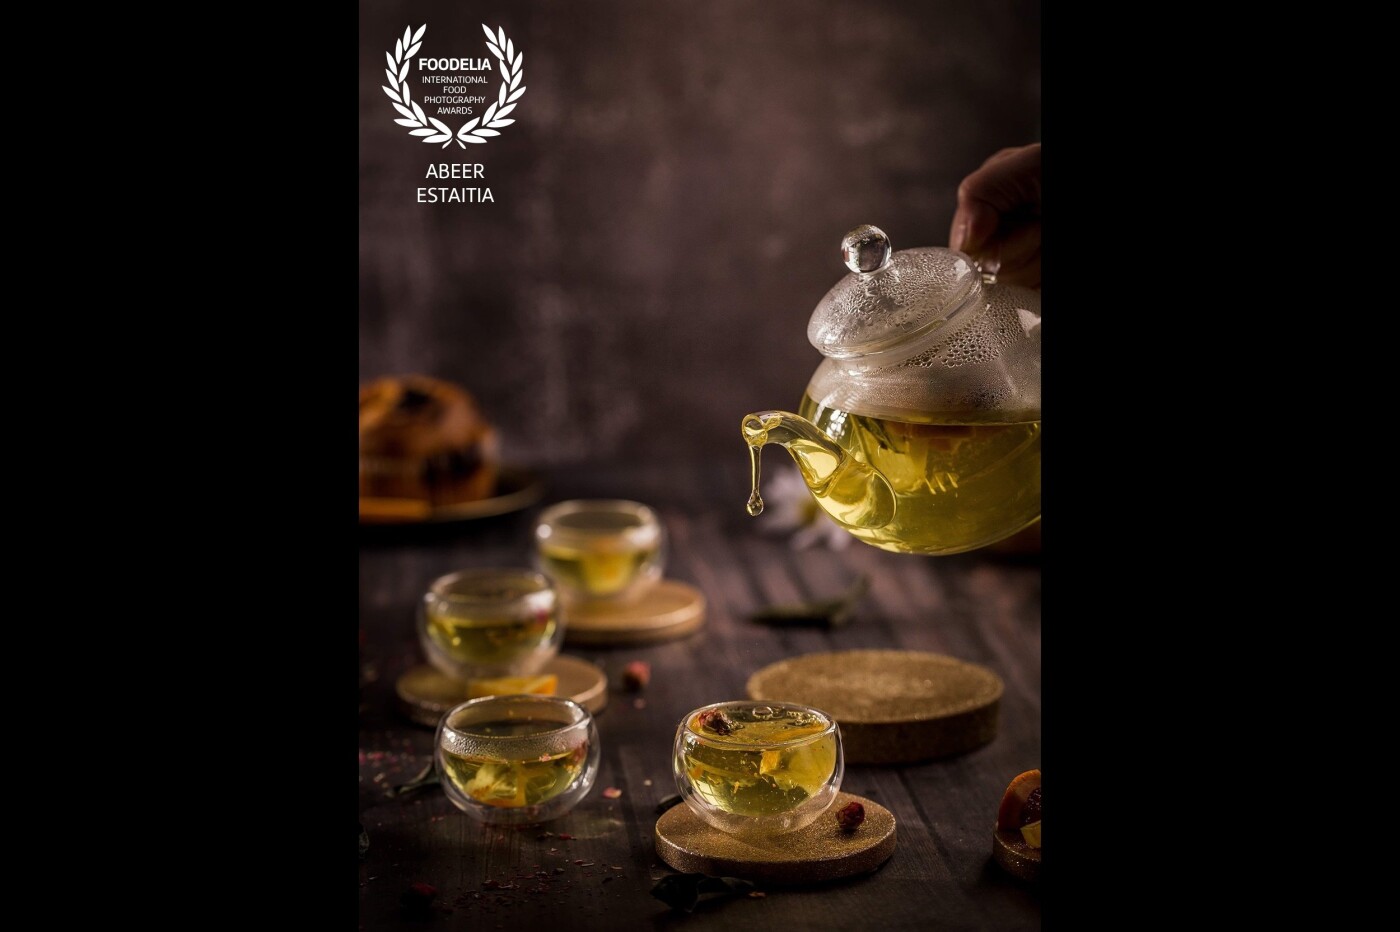 Catch your moment of the day. Stop the time, Relax and enjoy a cup tea, everything will be better. <br />
Freezing motion photography